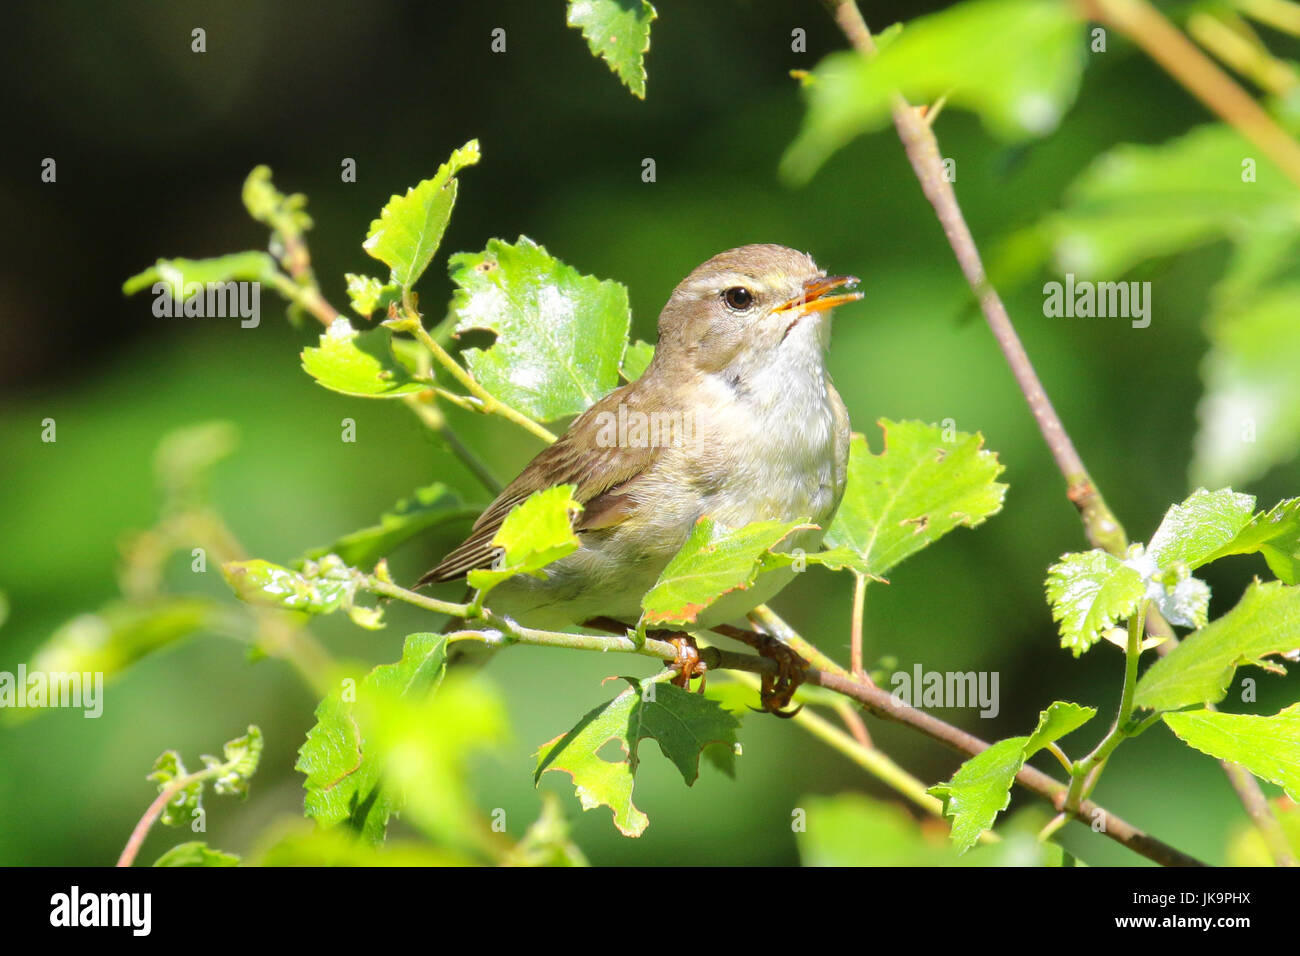 Willow warbler perched in a tree catching the sunlight Stock Photo